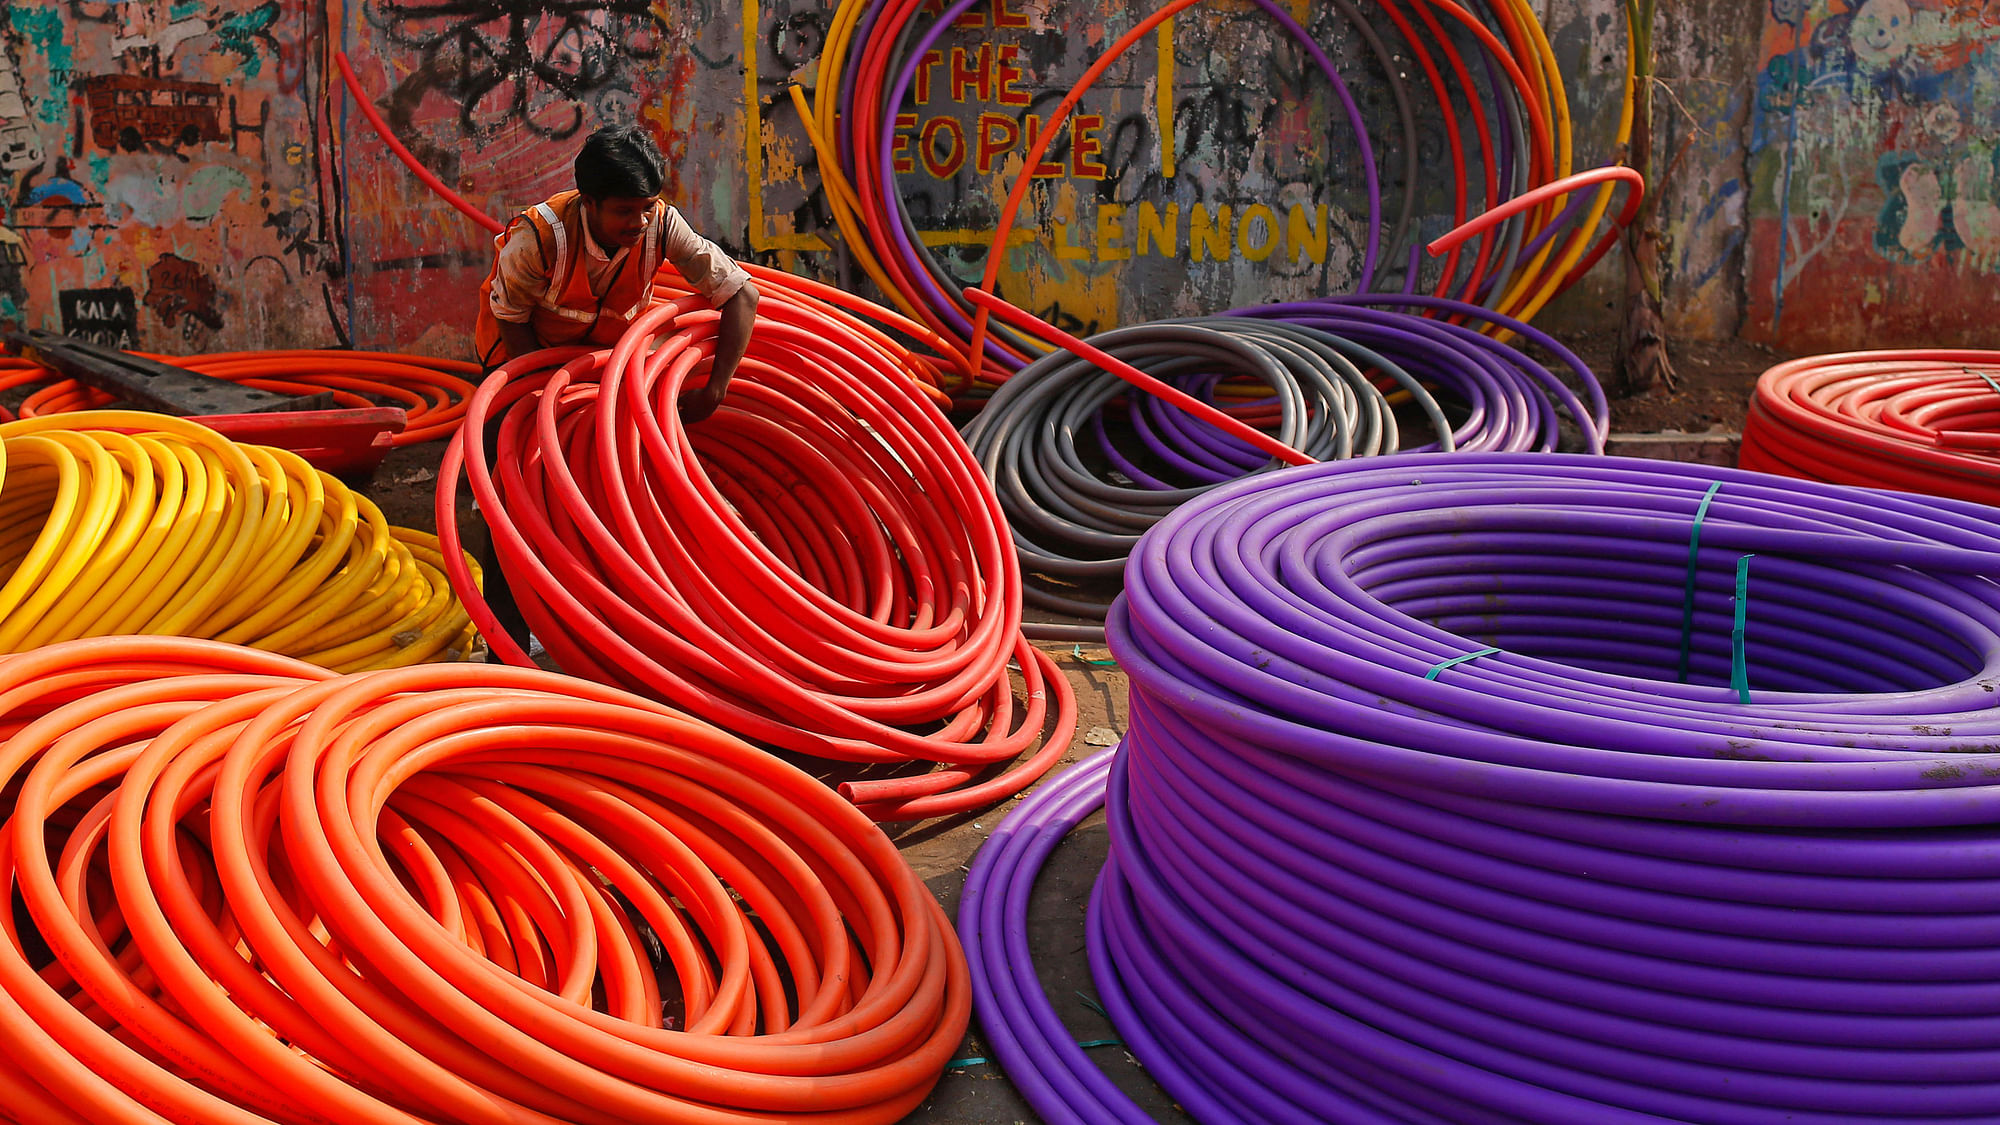 A labourer works amid rolls of underground telephone cable pipes on the side of a road in Mumbai. (Photo: Reuters)